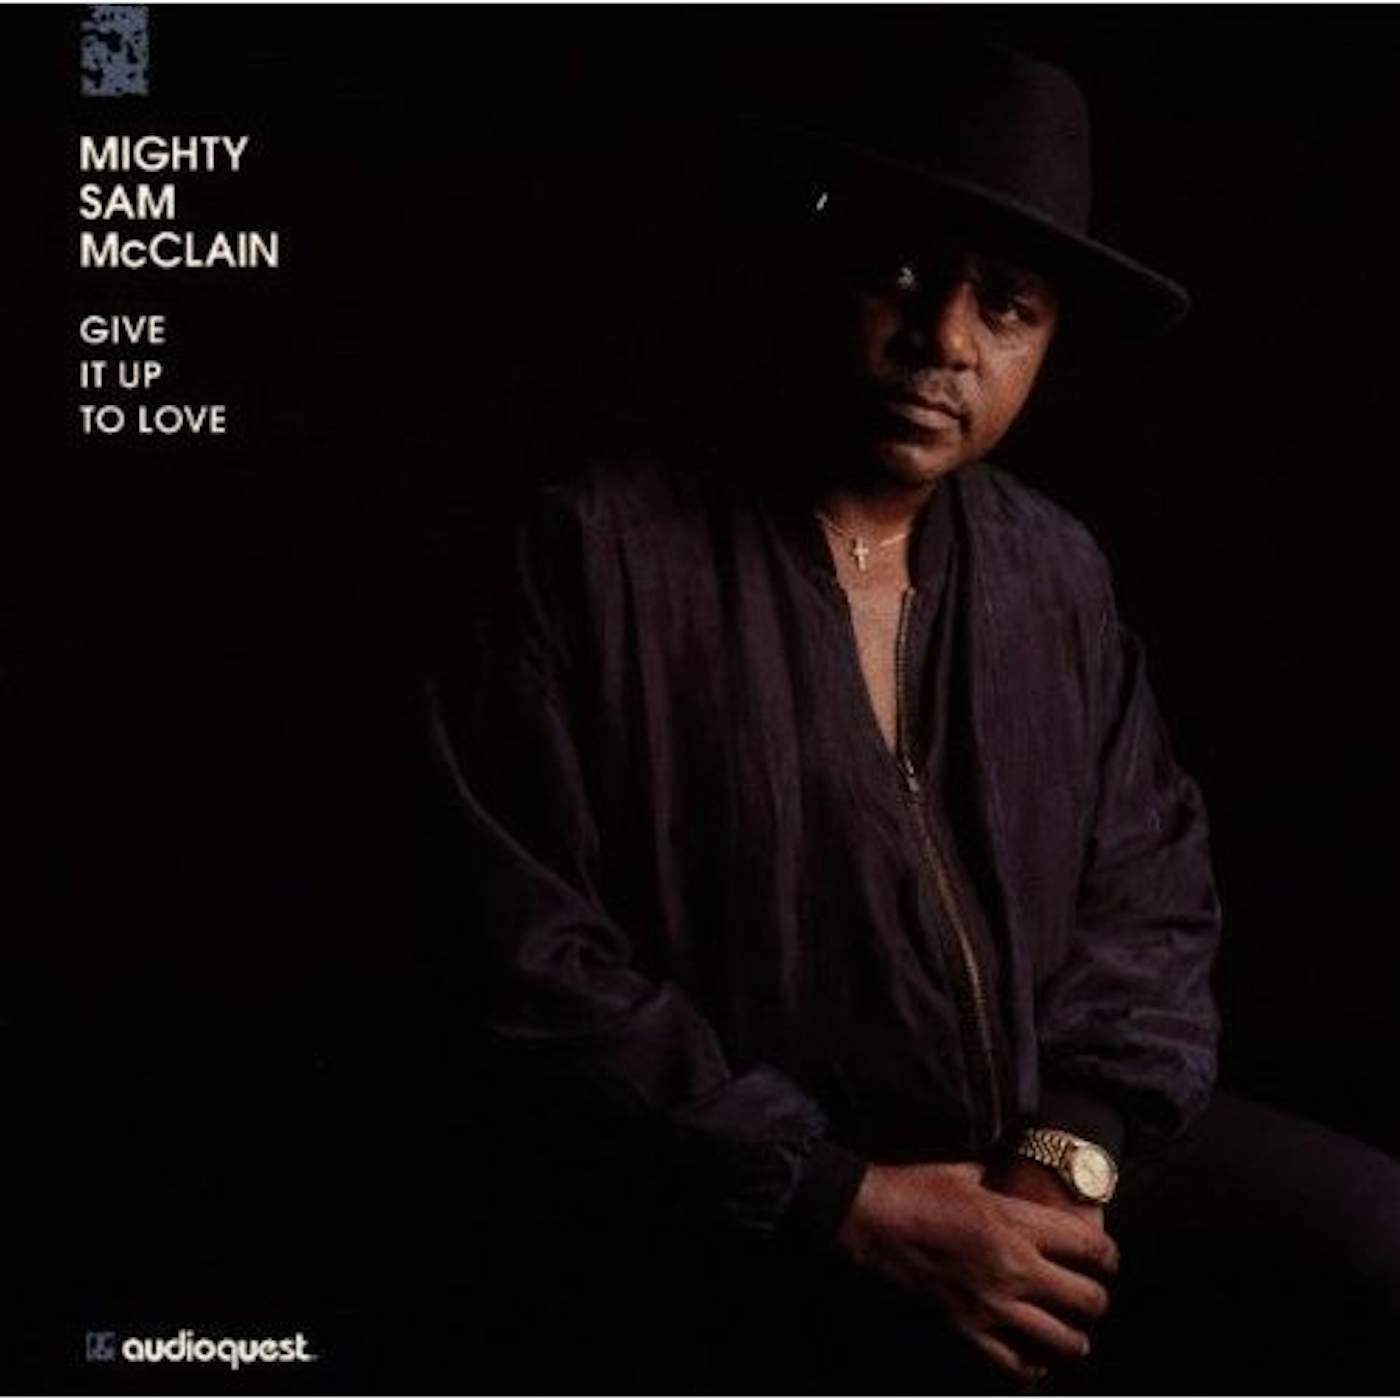 Mighty Sam McClain Give it Up to Love Vinyl Record